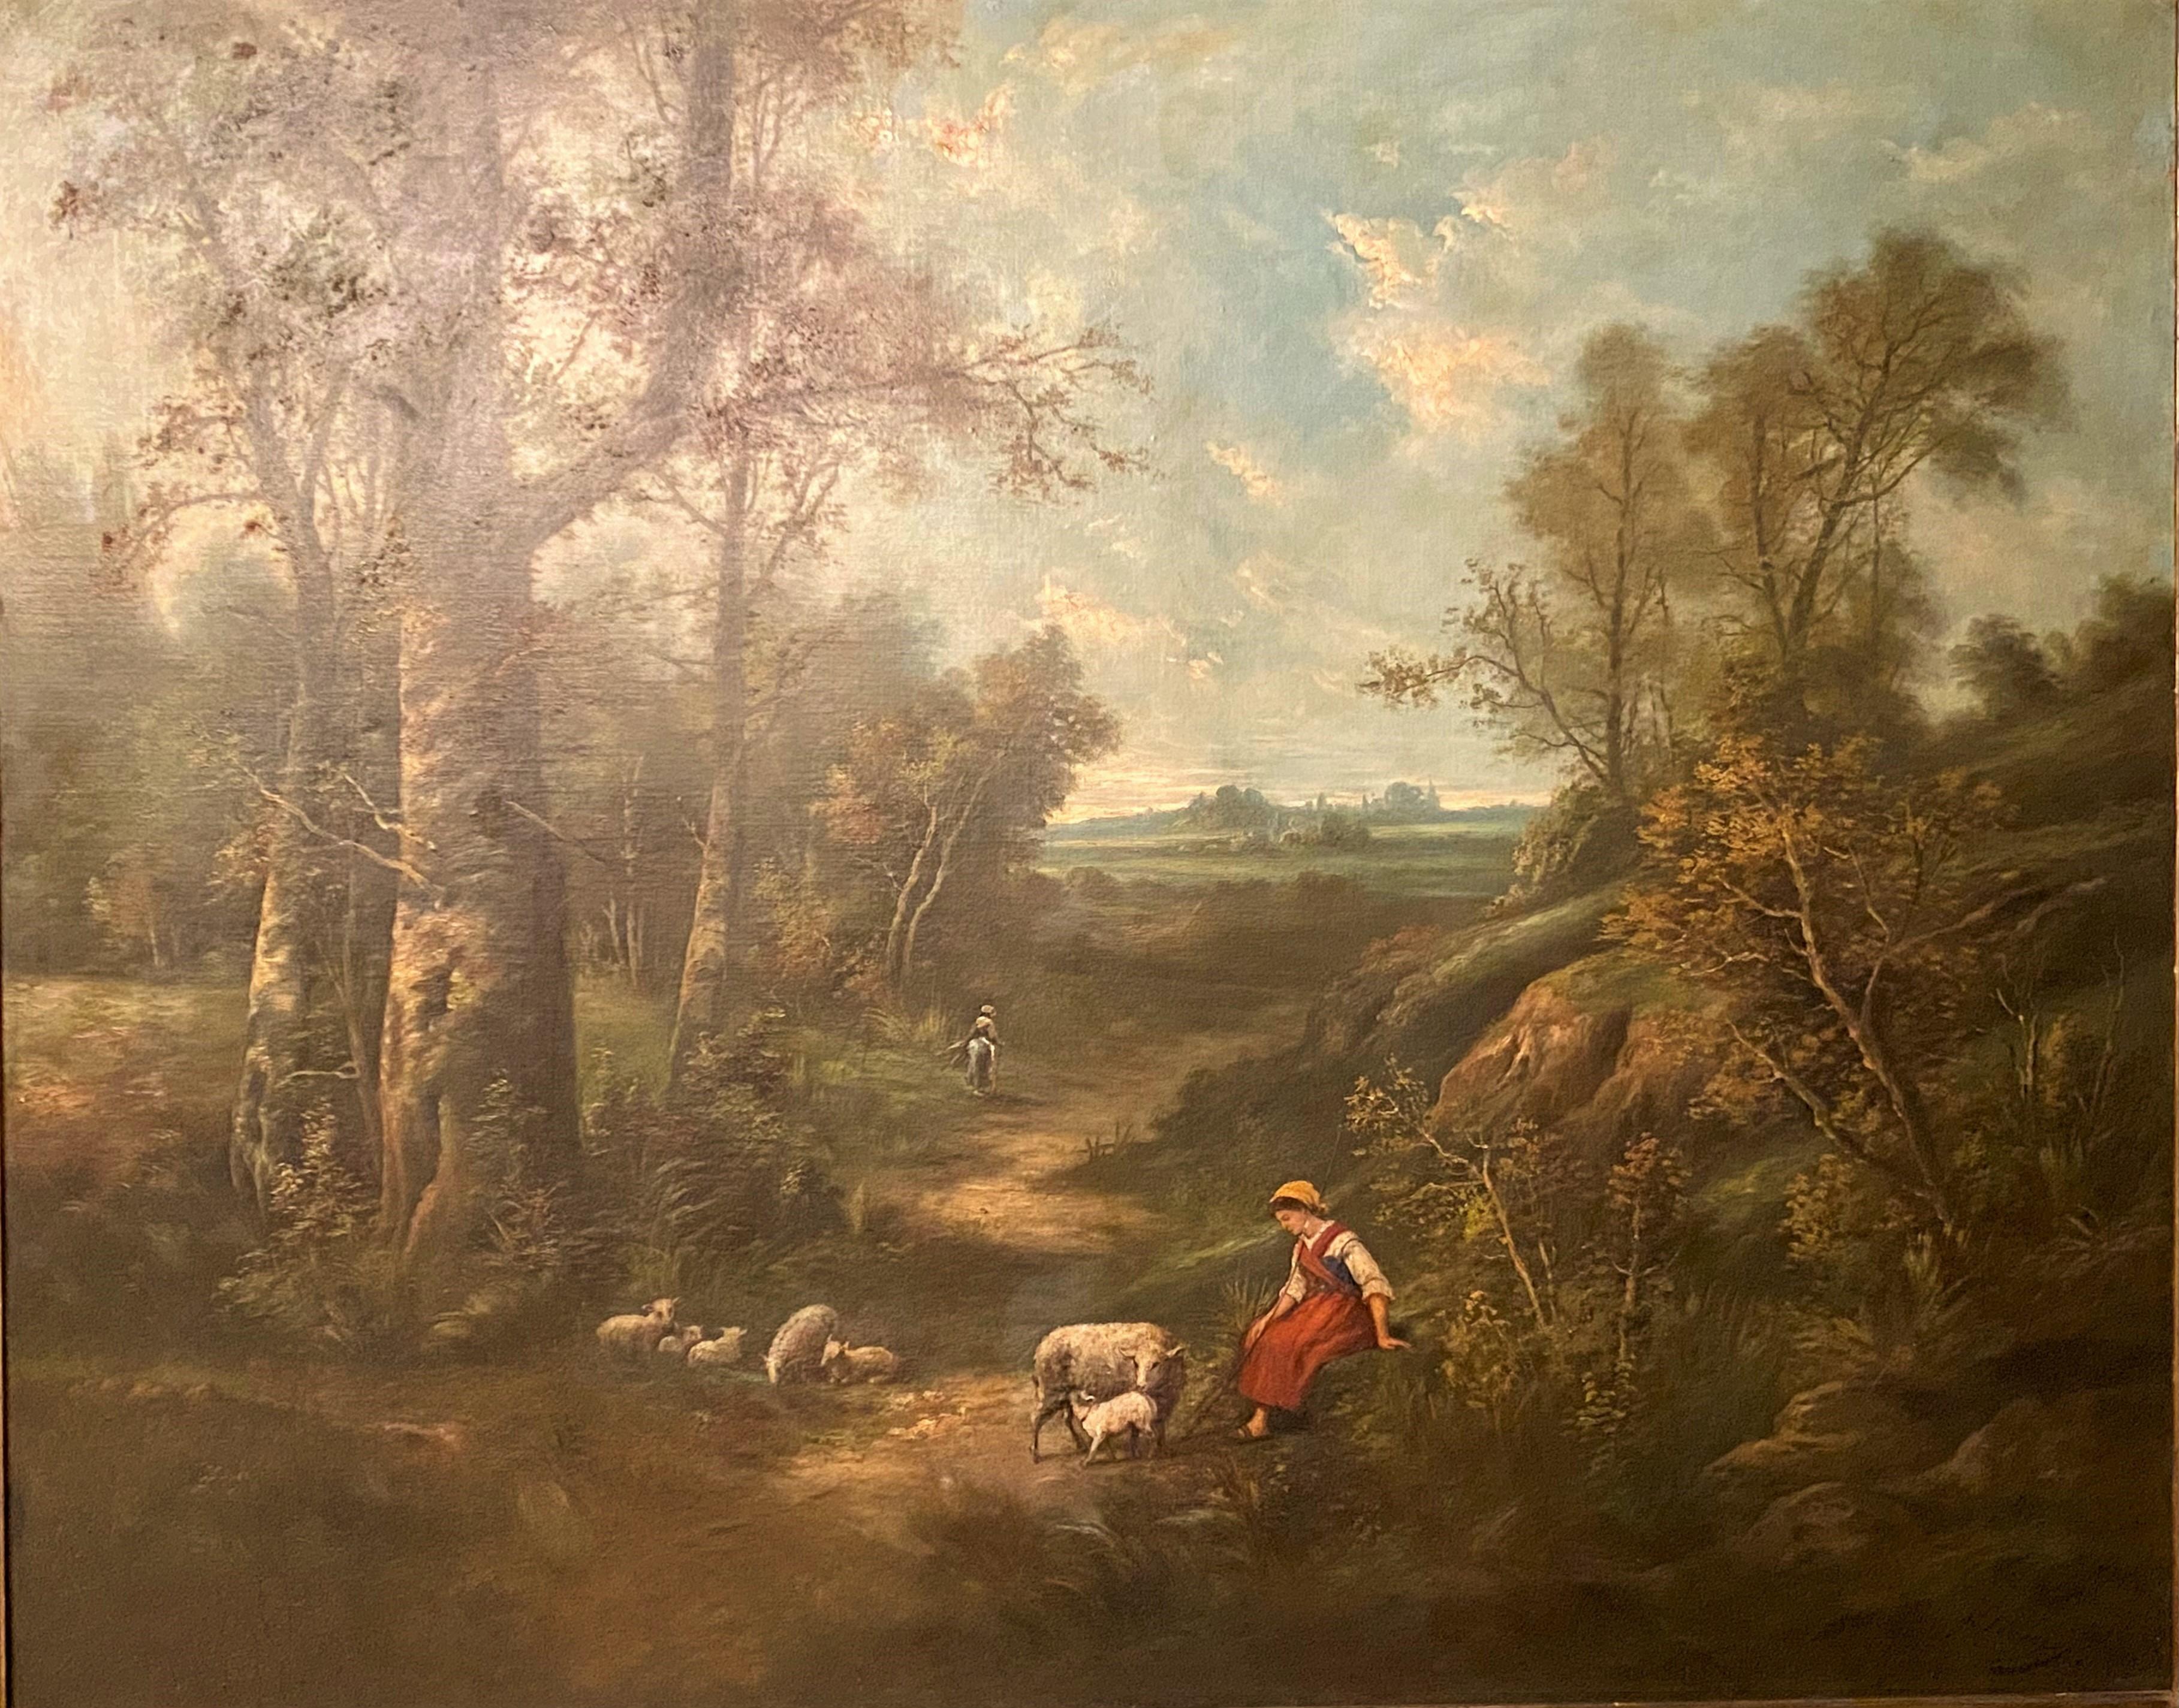 Antique French oil on canvas landscape painting signed by Artist Charles Henry, circa 1900-1925.
PLS107
Canvas: approximately 50